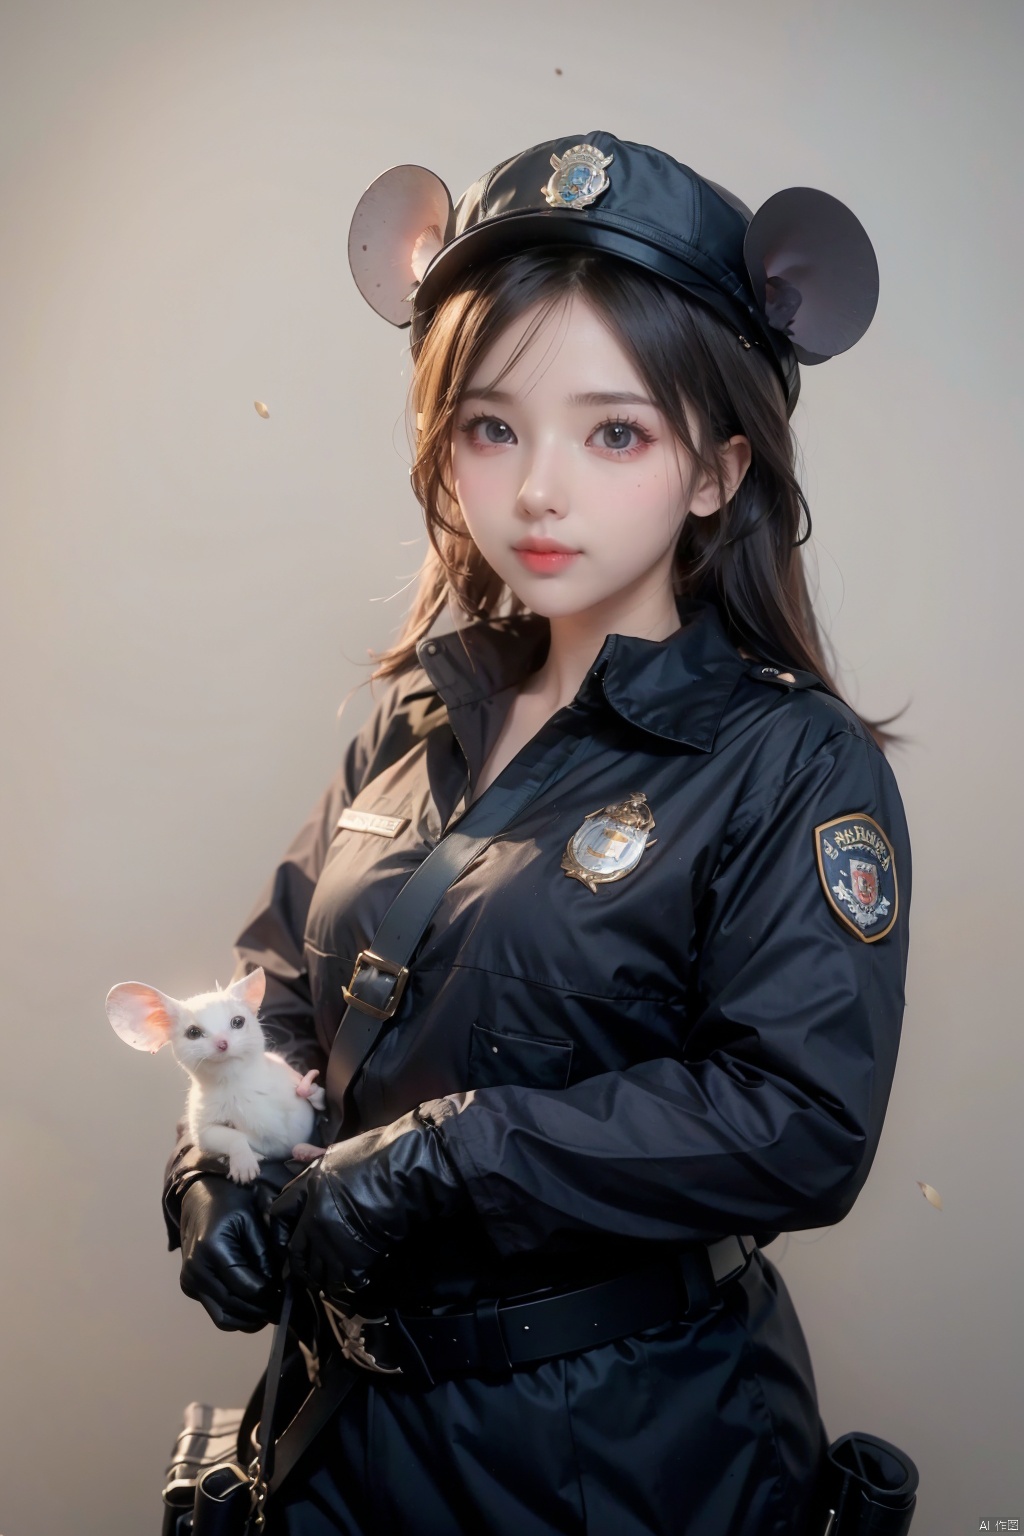 Imaginative concept art of a cute creature inspired by Lora, with the appearance of a mouse and dressed as a policeman. (CuteCreatures tag weighted at 0.9)